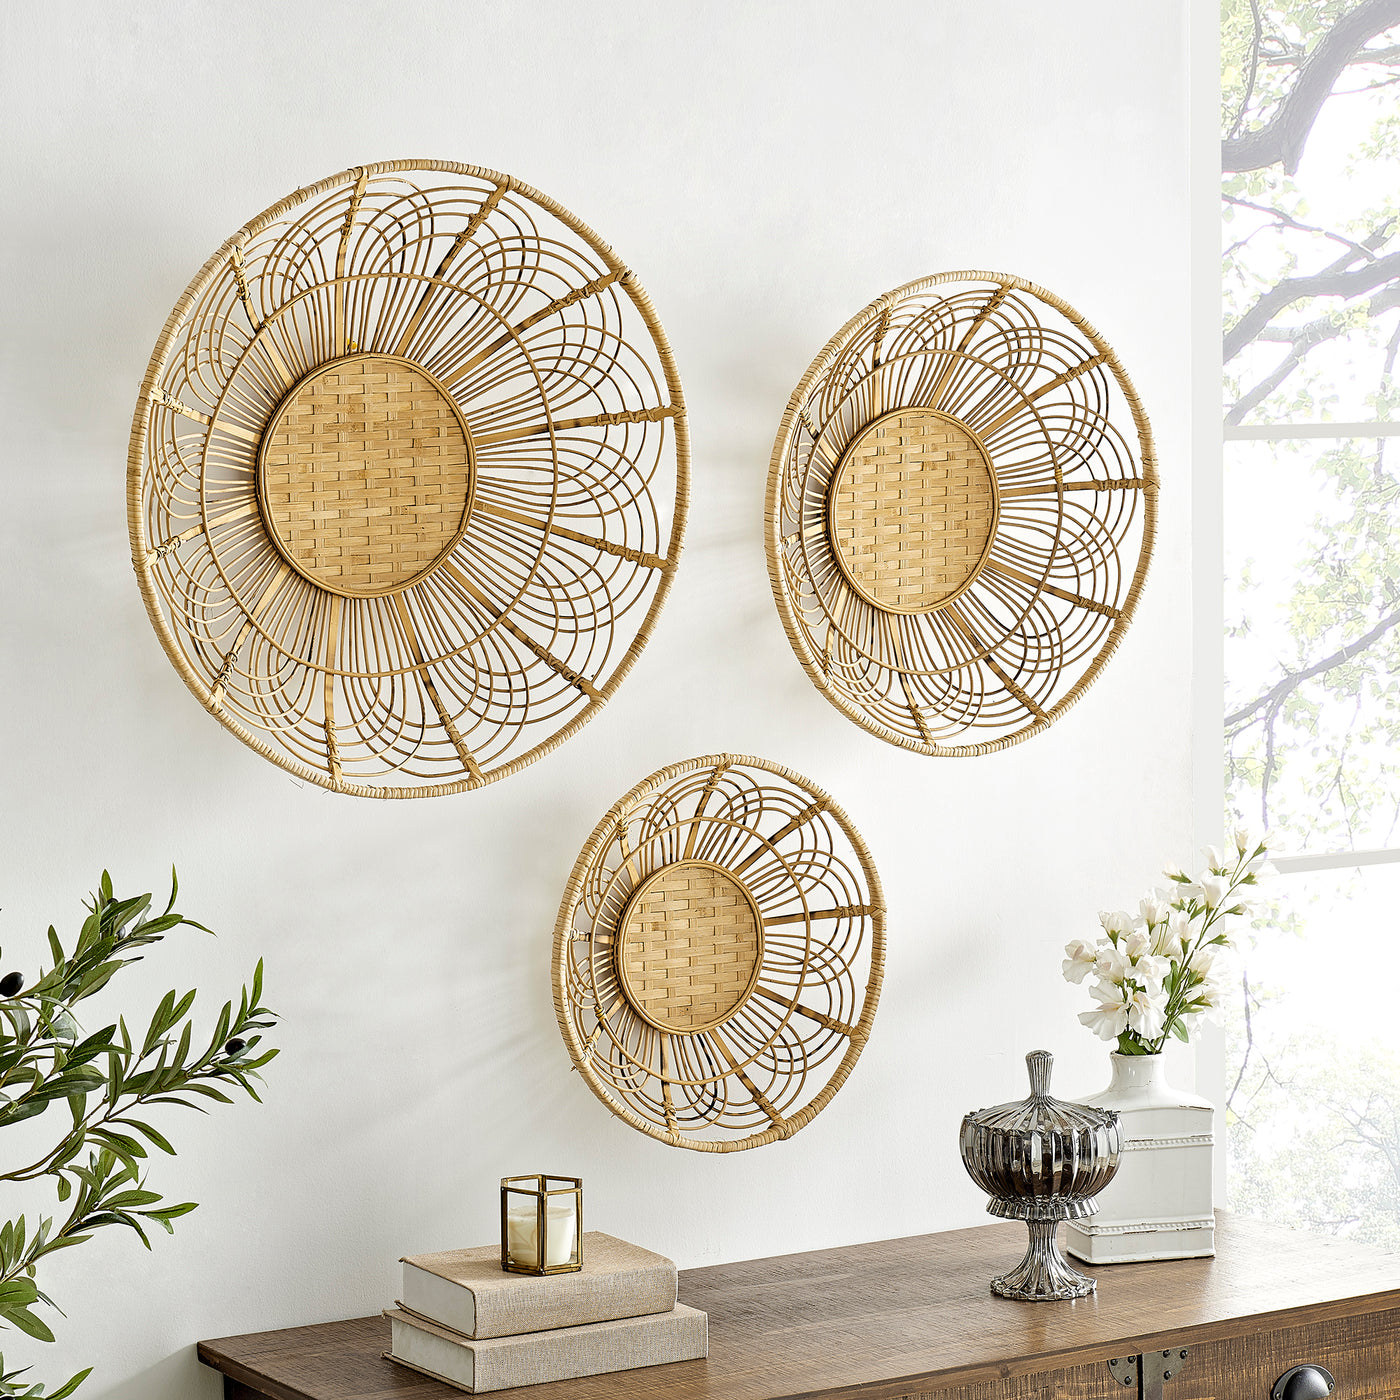 FirsTime & Co. Natural Dreamweaver Wall Decor 3-Piece Set, Bohemian Style, Made of Wood